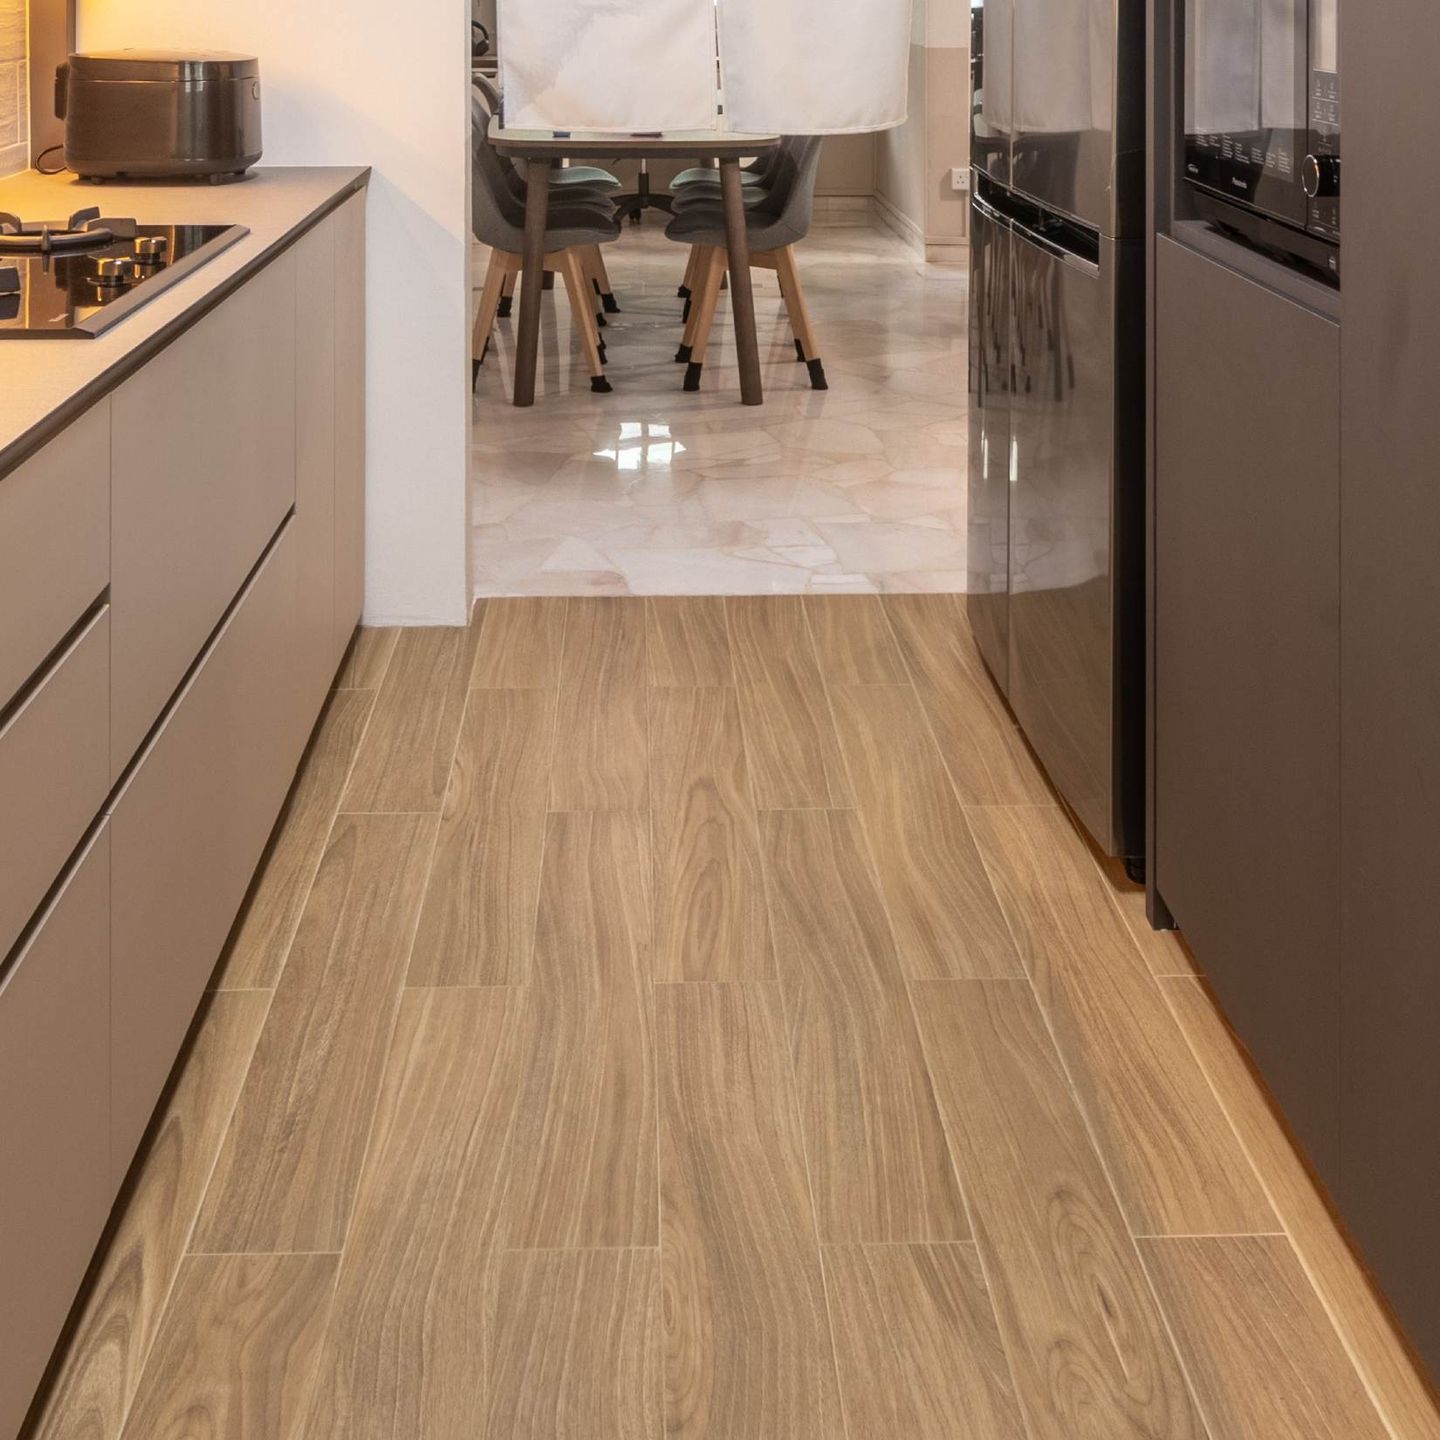 Modern Laminate Flooring With Wooden Planks